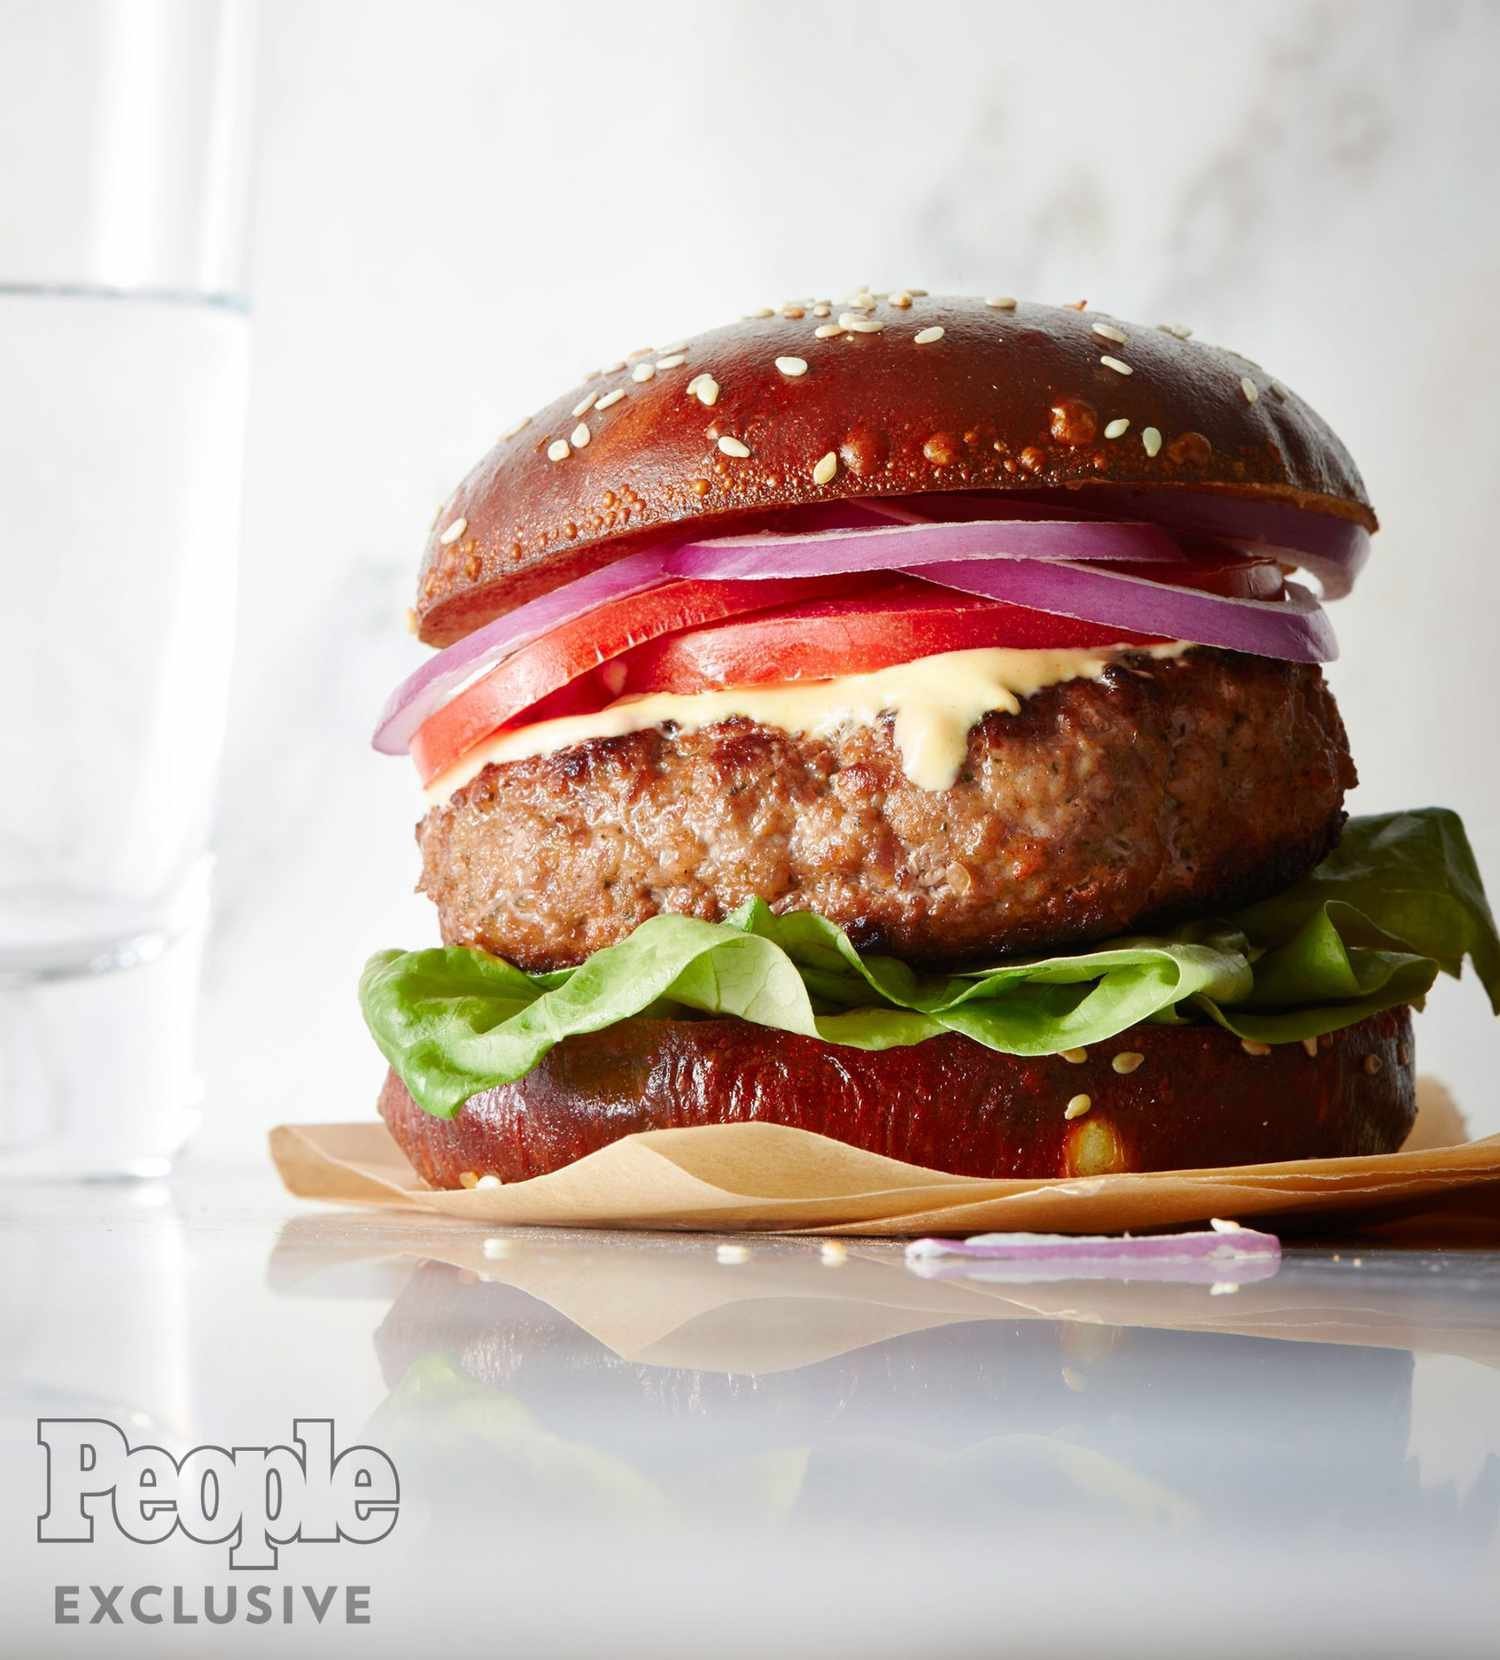 Get Oprah's Turkey Burger Recipe — Considered by Gayle to Be the 'All-Time Best'